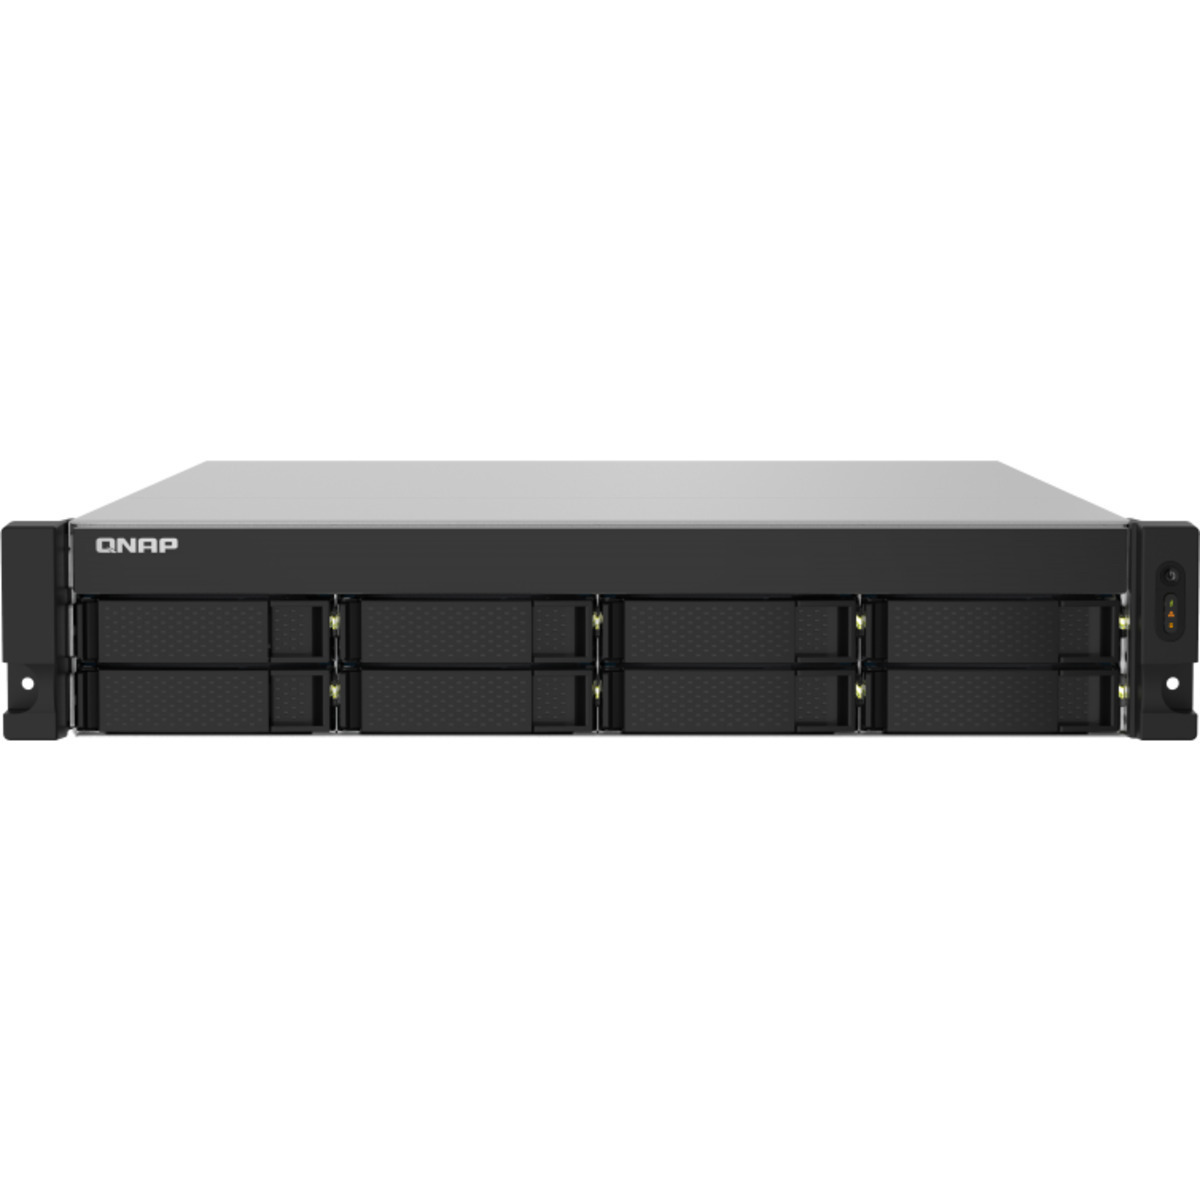 QNAP TS-832PXU 84tb 8-Bay RackMount Personal / Basic Home / Small Office NAS - Network Attached Storage Device 7x12tb Toshiba Enterprise Capacity MG07ACA12TE 3.5 7200rpm SATA 6Gb/s HDD ENTERPRISE Class Drives Installed - Burn-In Tested - FREE RAM UPGRADE TS-832PXU